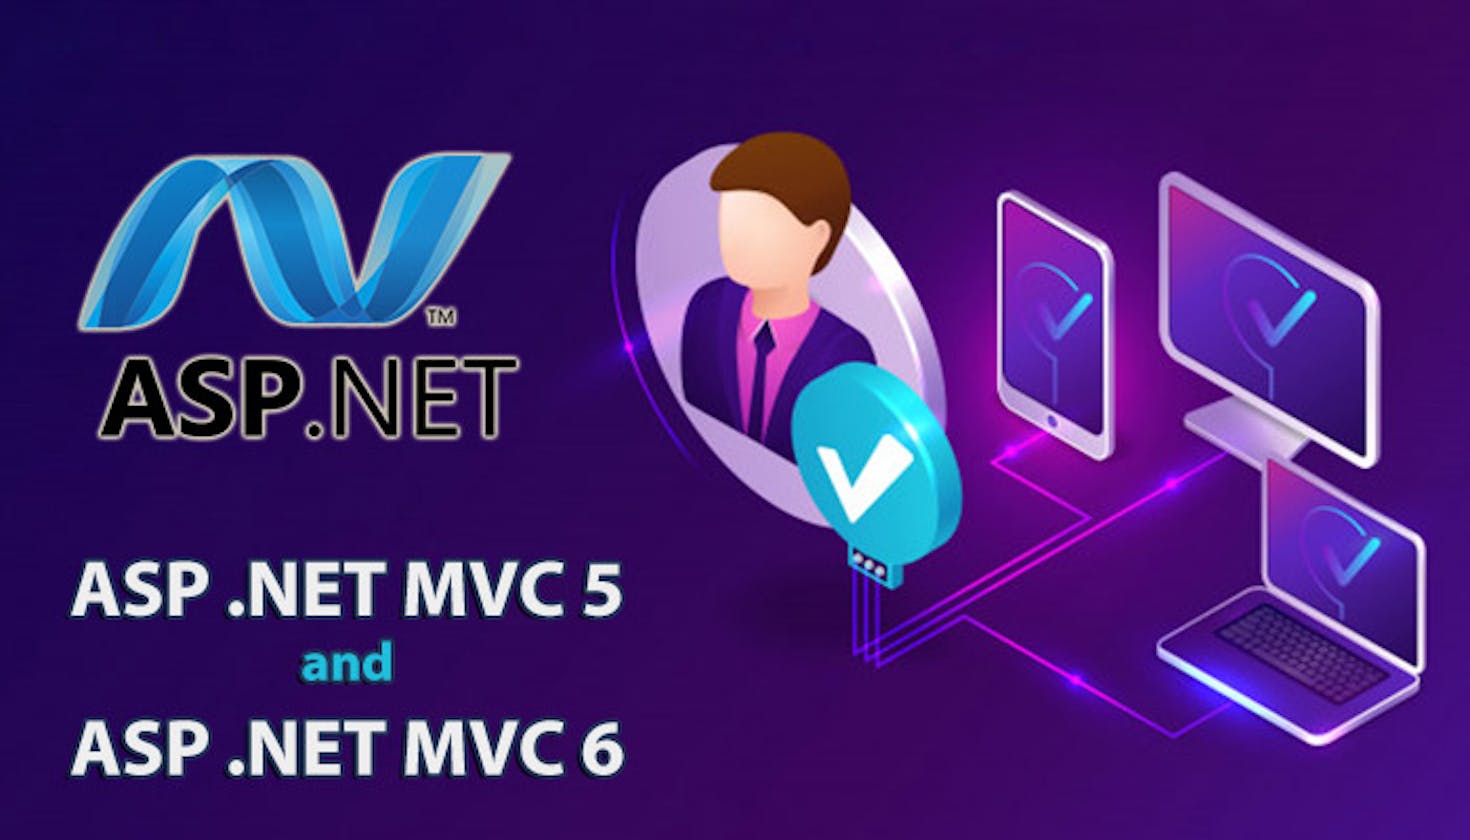 Differences between ASP.NET 5 and ASP.NET MVC 6